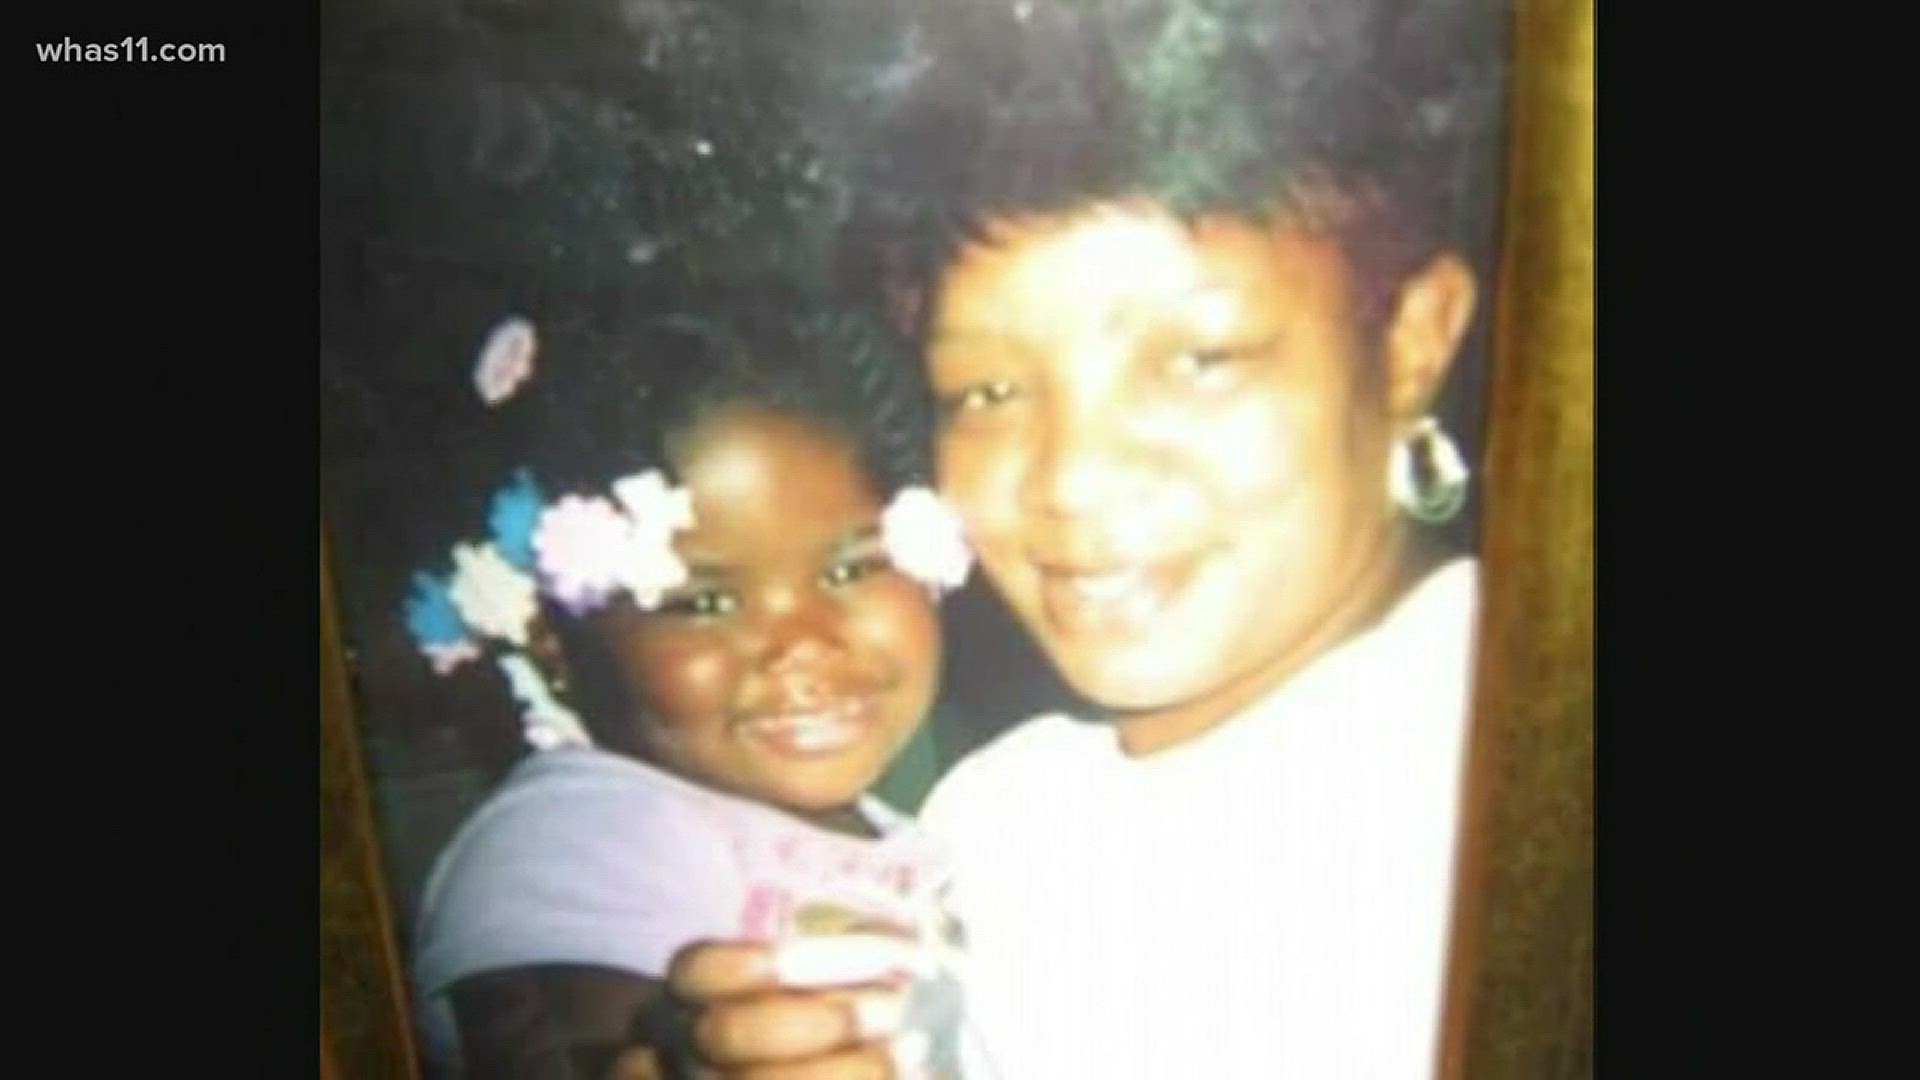 Sabrina Bragg was a mother and grandmother, who, like many of us, had her own struggles in life.